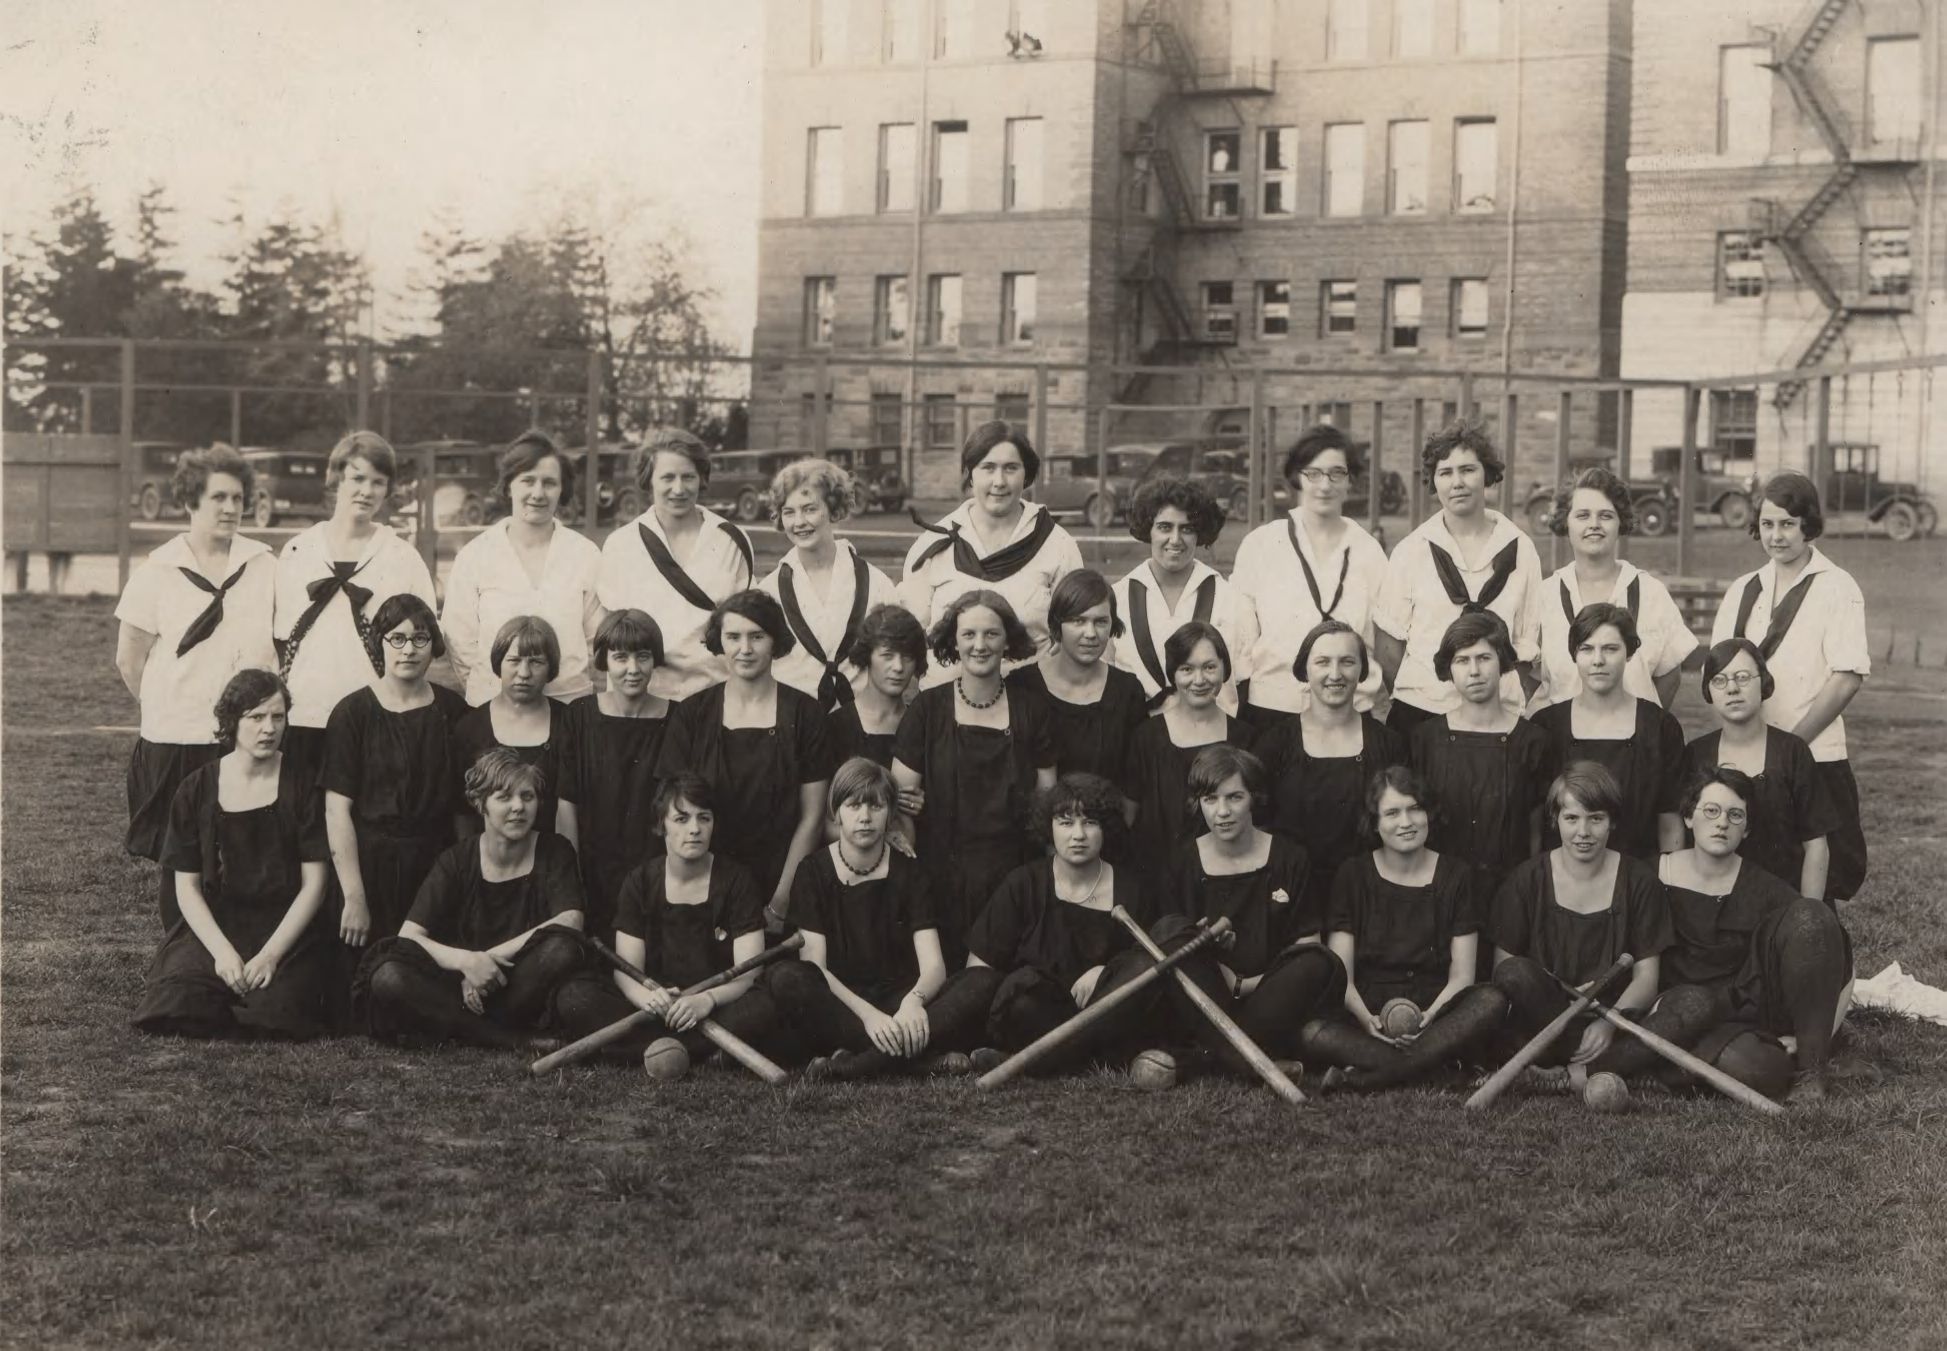 The women's baseball team gathers for a portrait near Old Main in 1927.